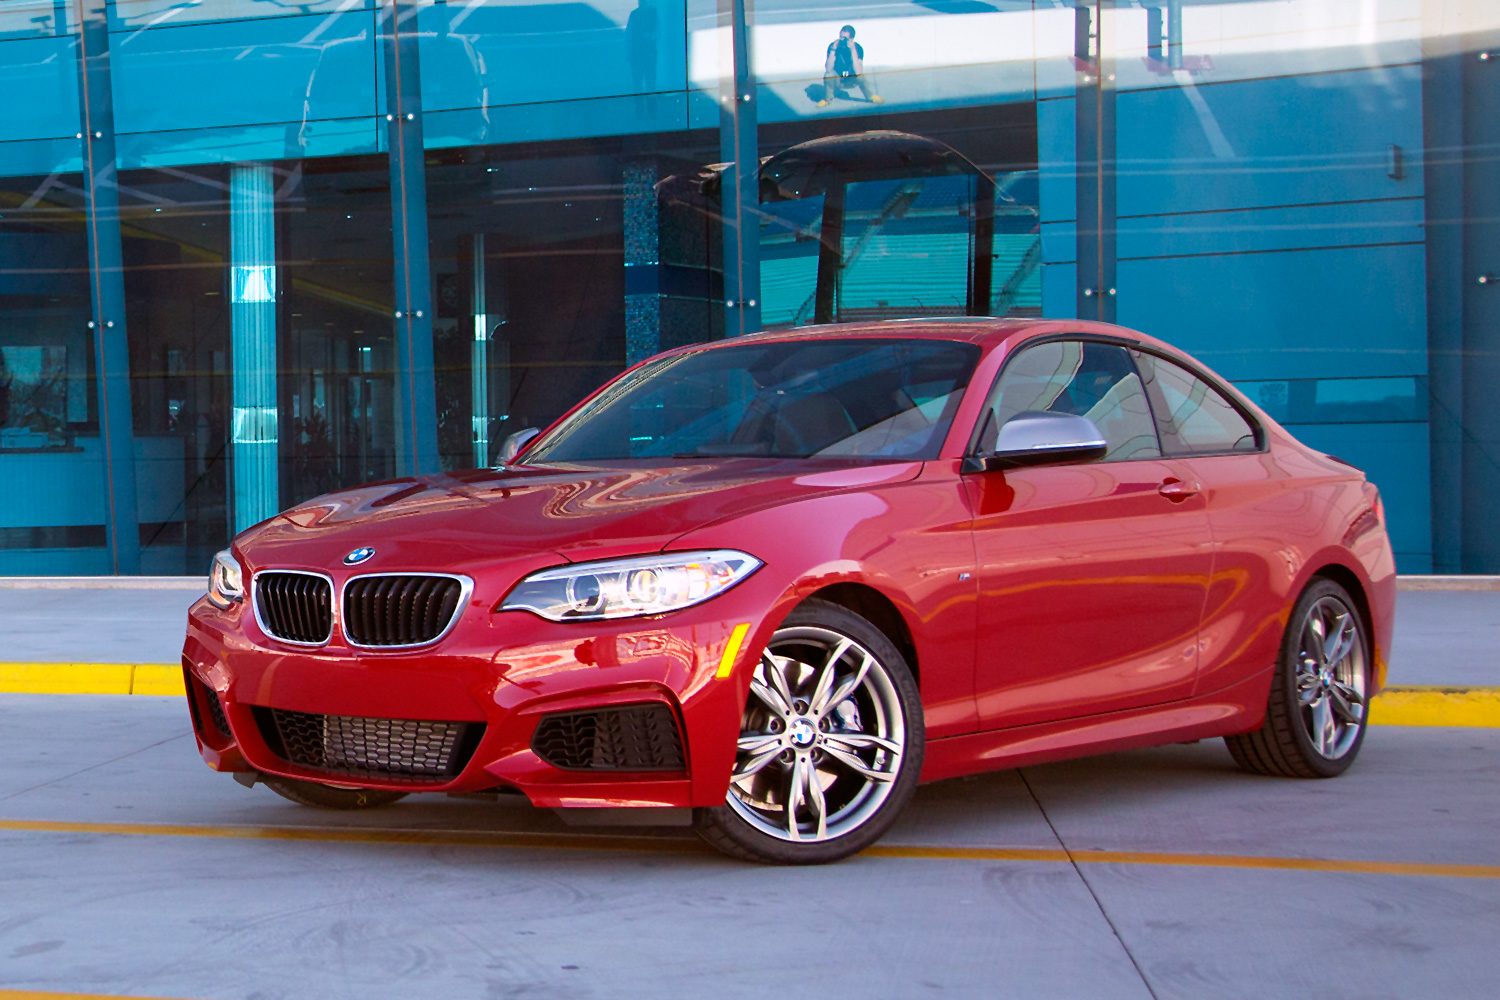 First Drive: 2014 BMW M235i - The Manual